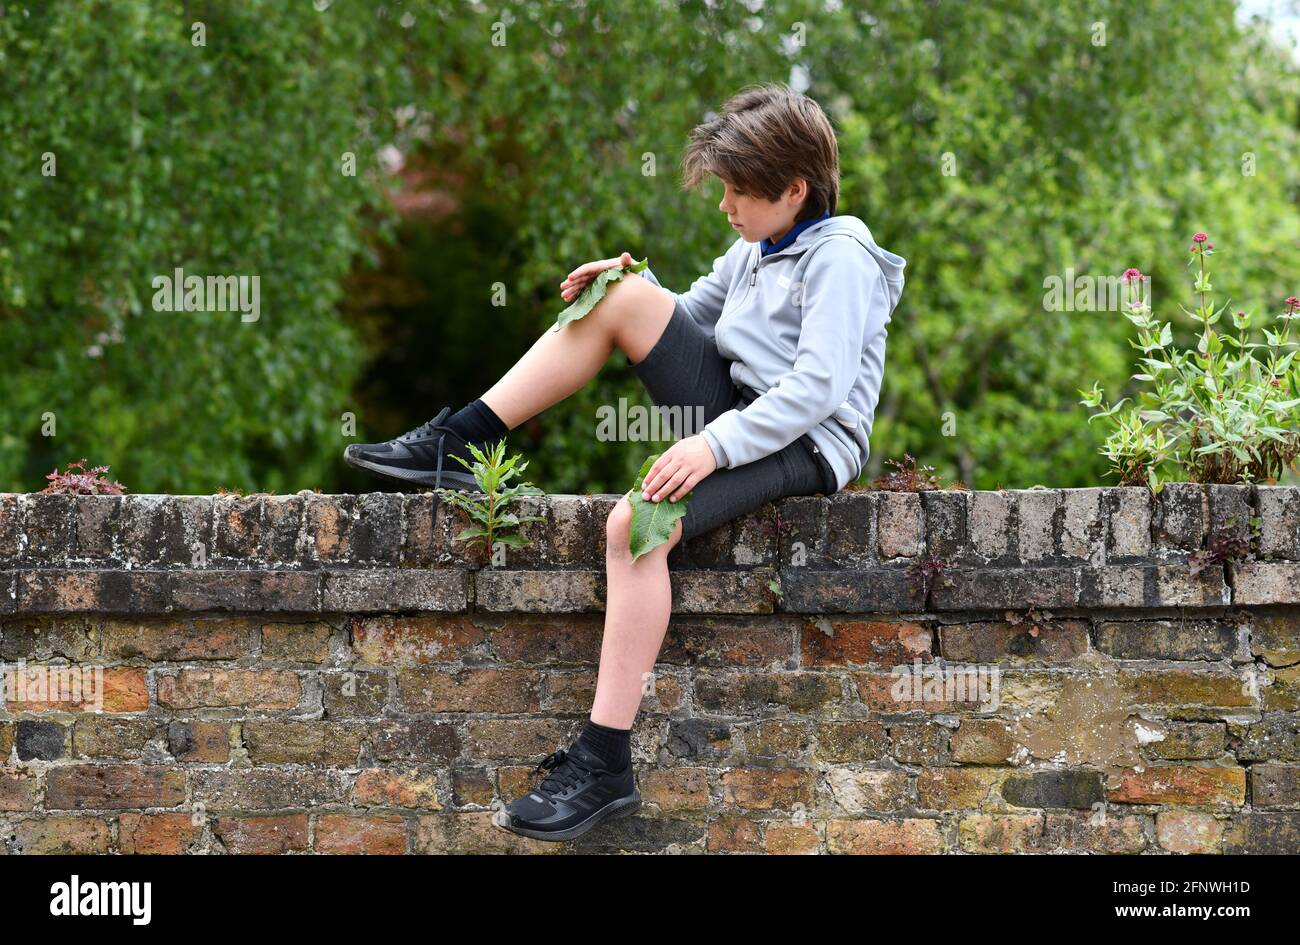 Young boy rubbing his knee with a dock leaf to treat a nettle sting Stock Photo